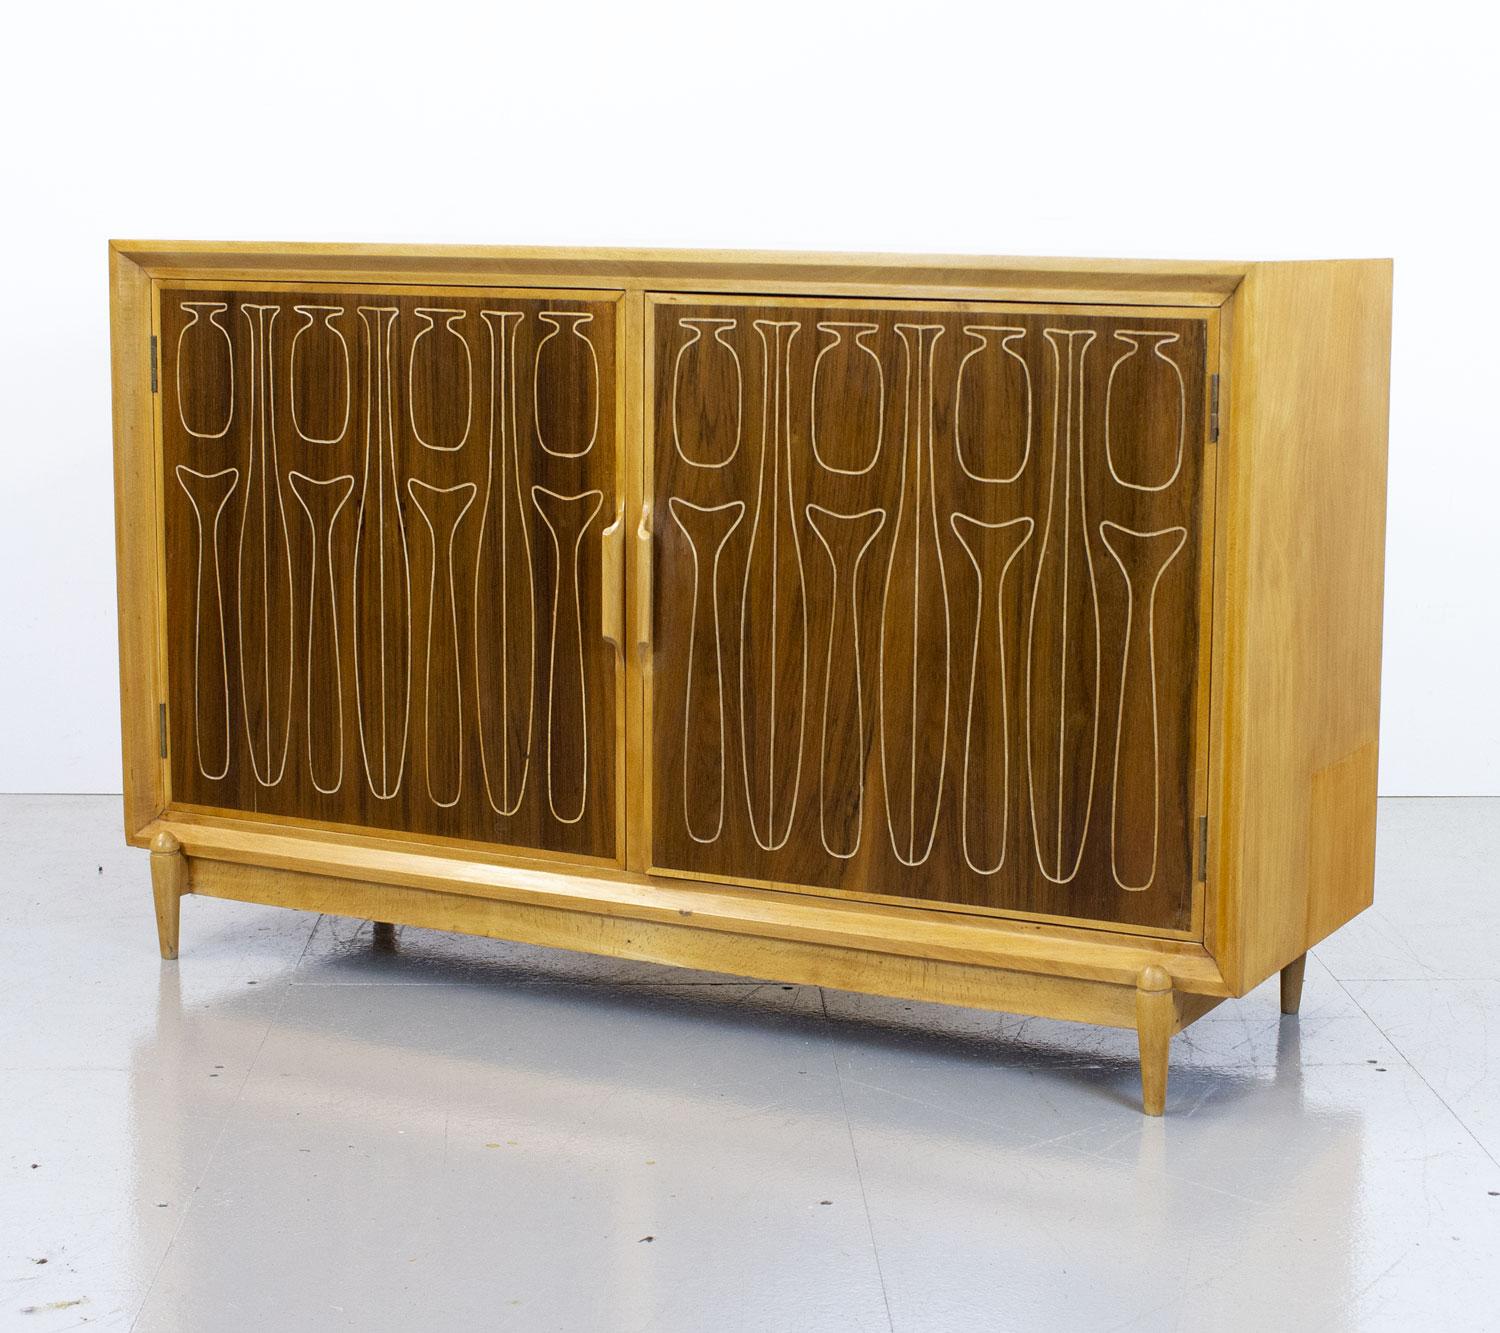 Very rare and super stylish sideboard designed by Kelvin McAvoy for the Liberty & Co luxury department store in London. Kelvin McAvoy was an interior designer and painter who studied at the Glasgow School of Art. As a student he became acquainted